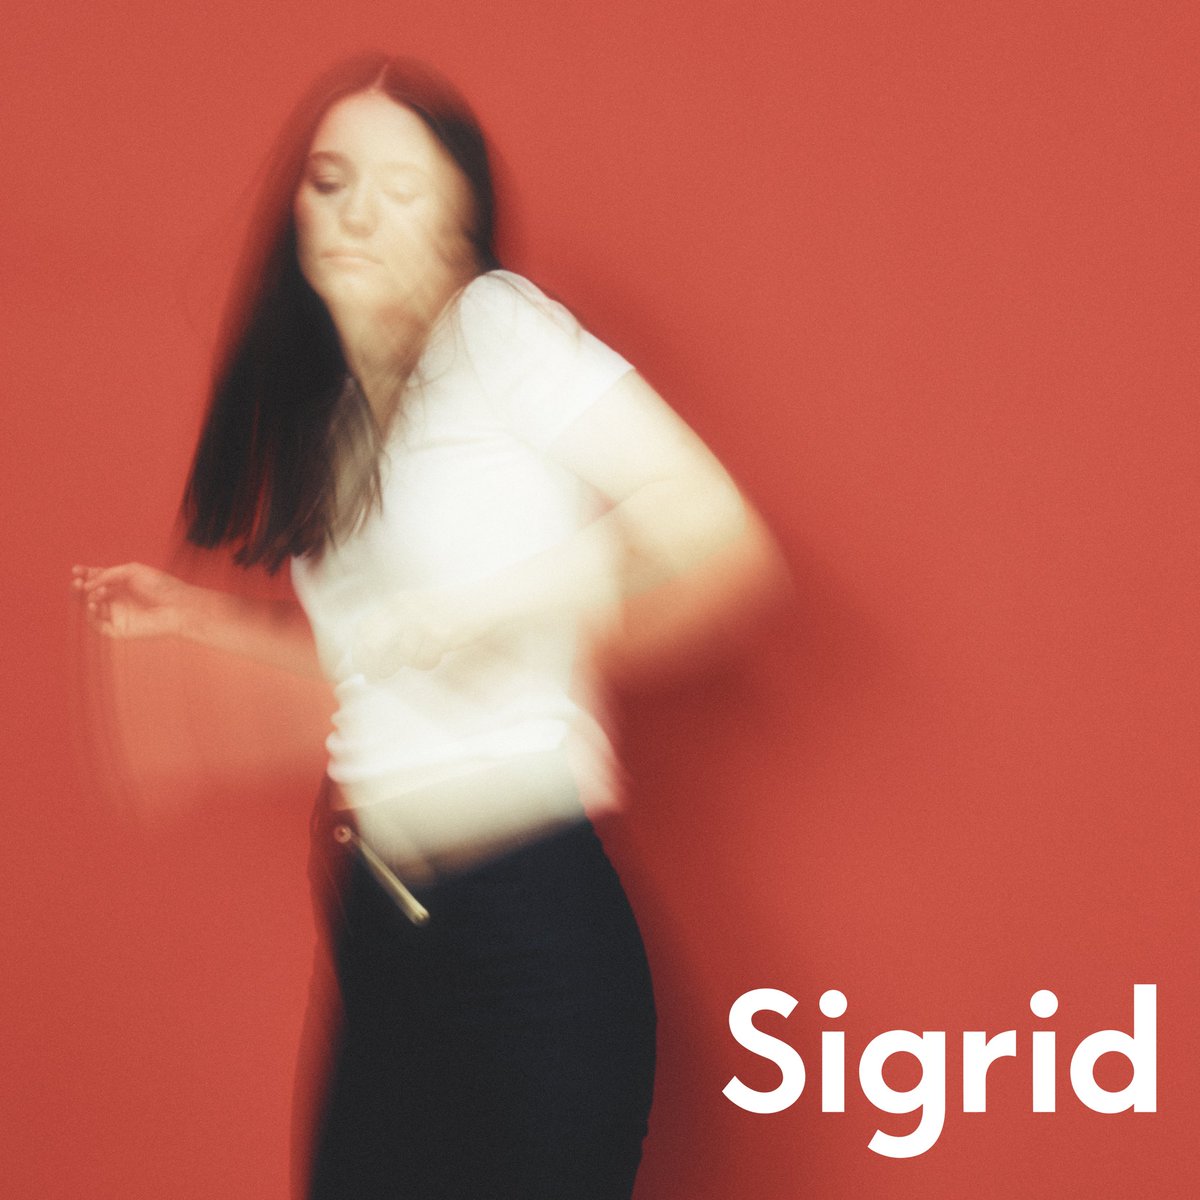 my new single Ghost is out right now! tour starts tonight! AND I’M RELEASING AN EP. 👹 I’ve been writing loads this year, and felt like releasing just one single this year wasn’t enough, so get ready for The Hype EP release on October 27th (I can’t wait). sigrid.lnk.to/thehype-ep